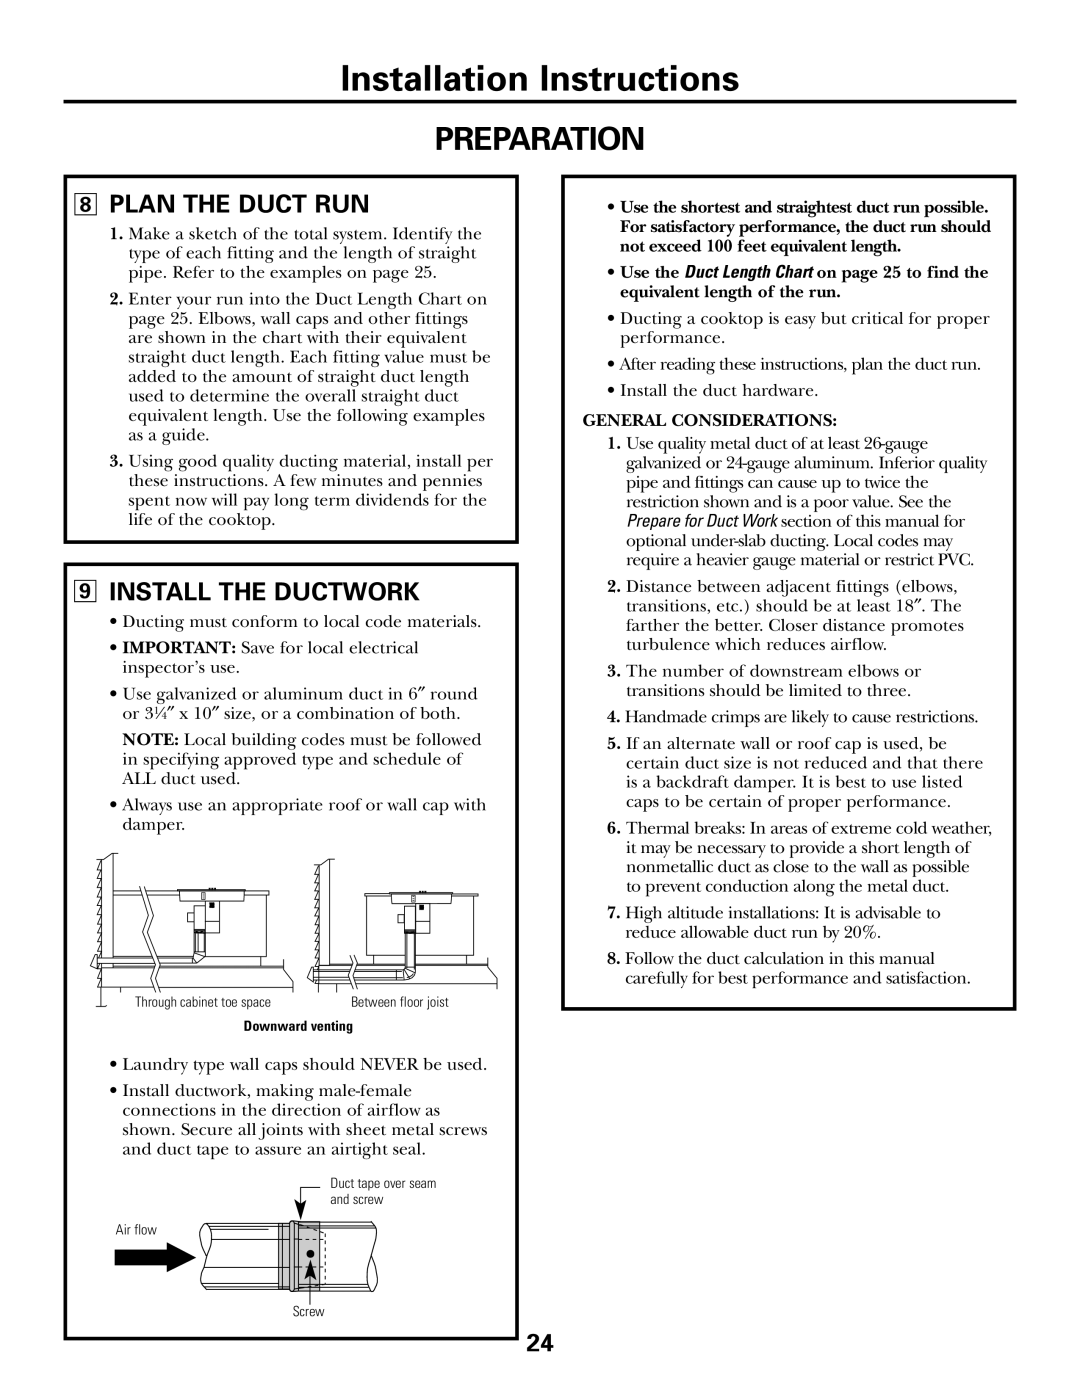 GE JGP990 manual Installation Instructions, Preparation, 8PLAN THE DUCT RUN, 9INSTALL THE DUCTWORK, General Considerations 